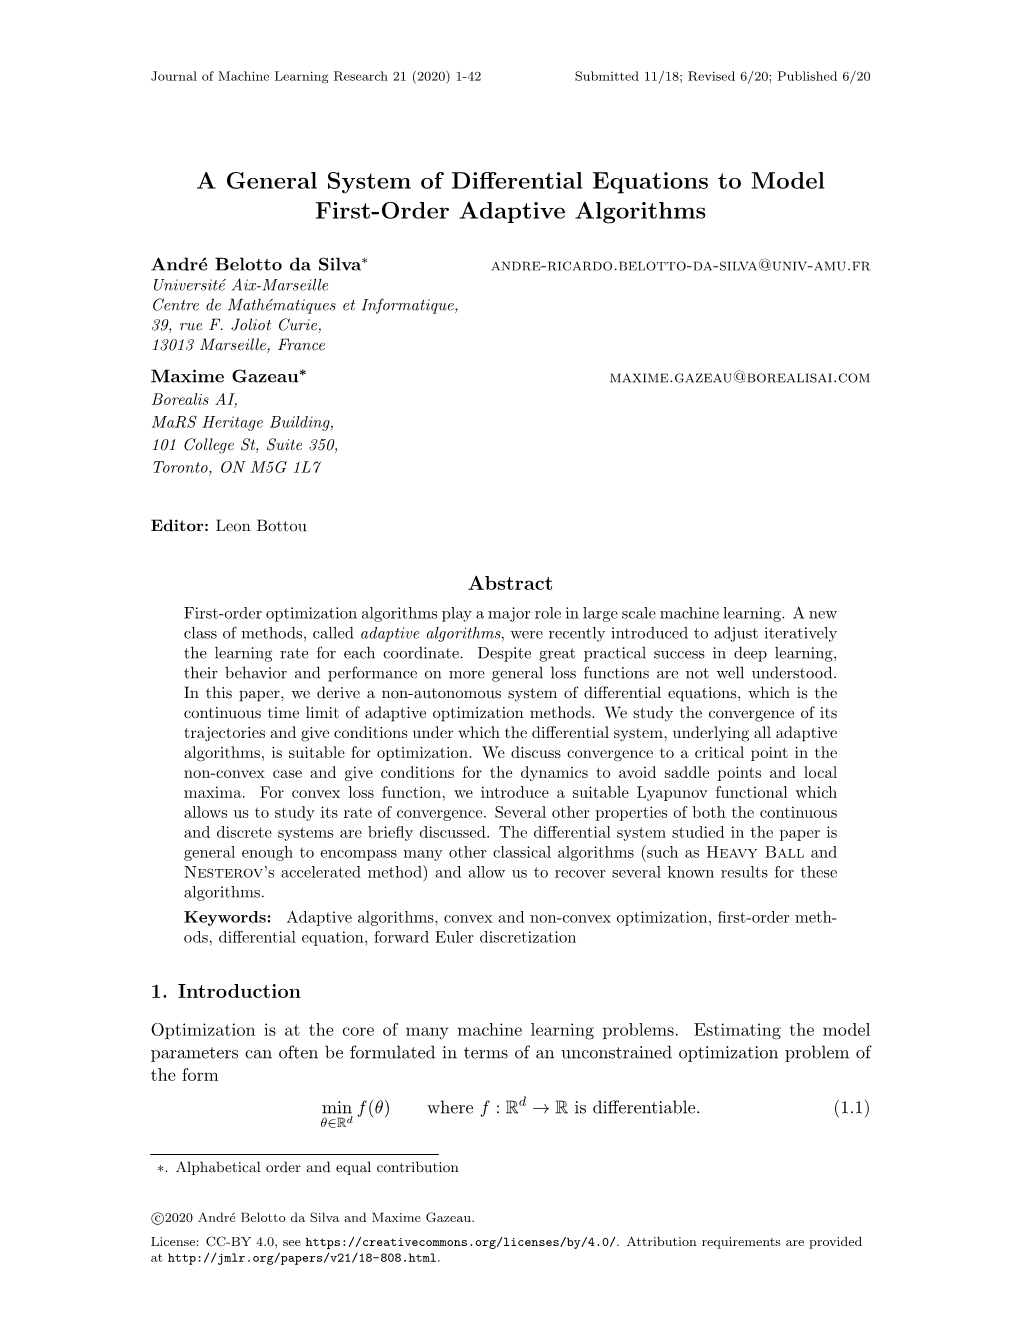 A General System of Differential Equations to Model First-Order